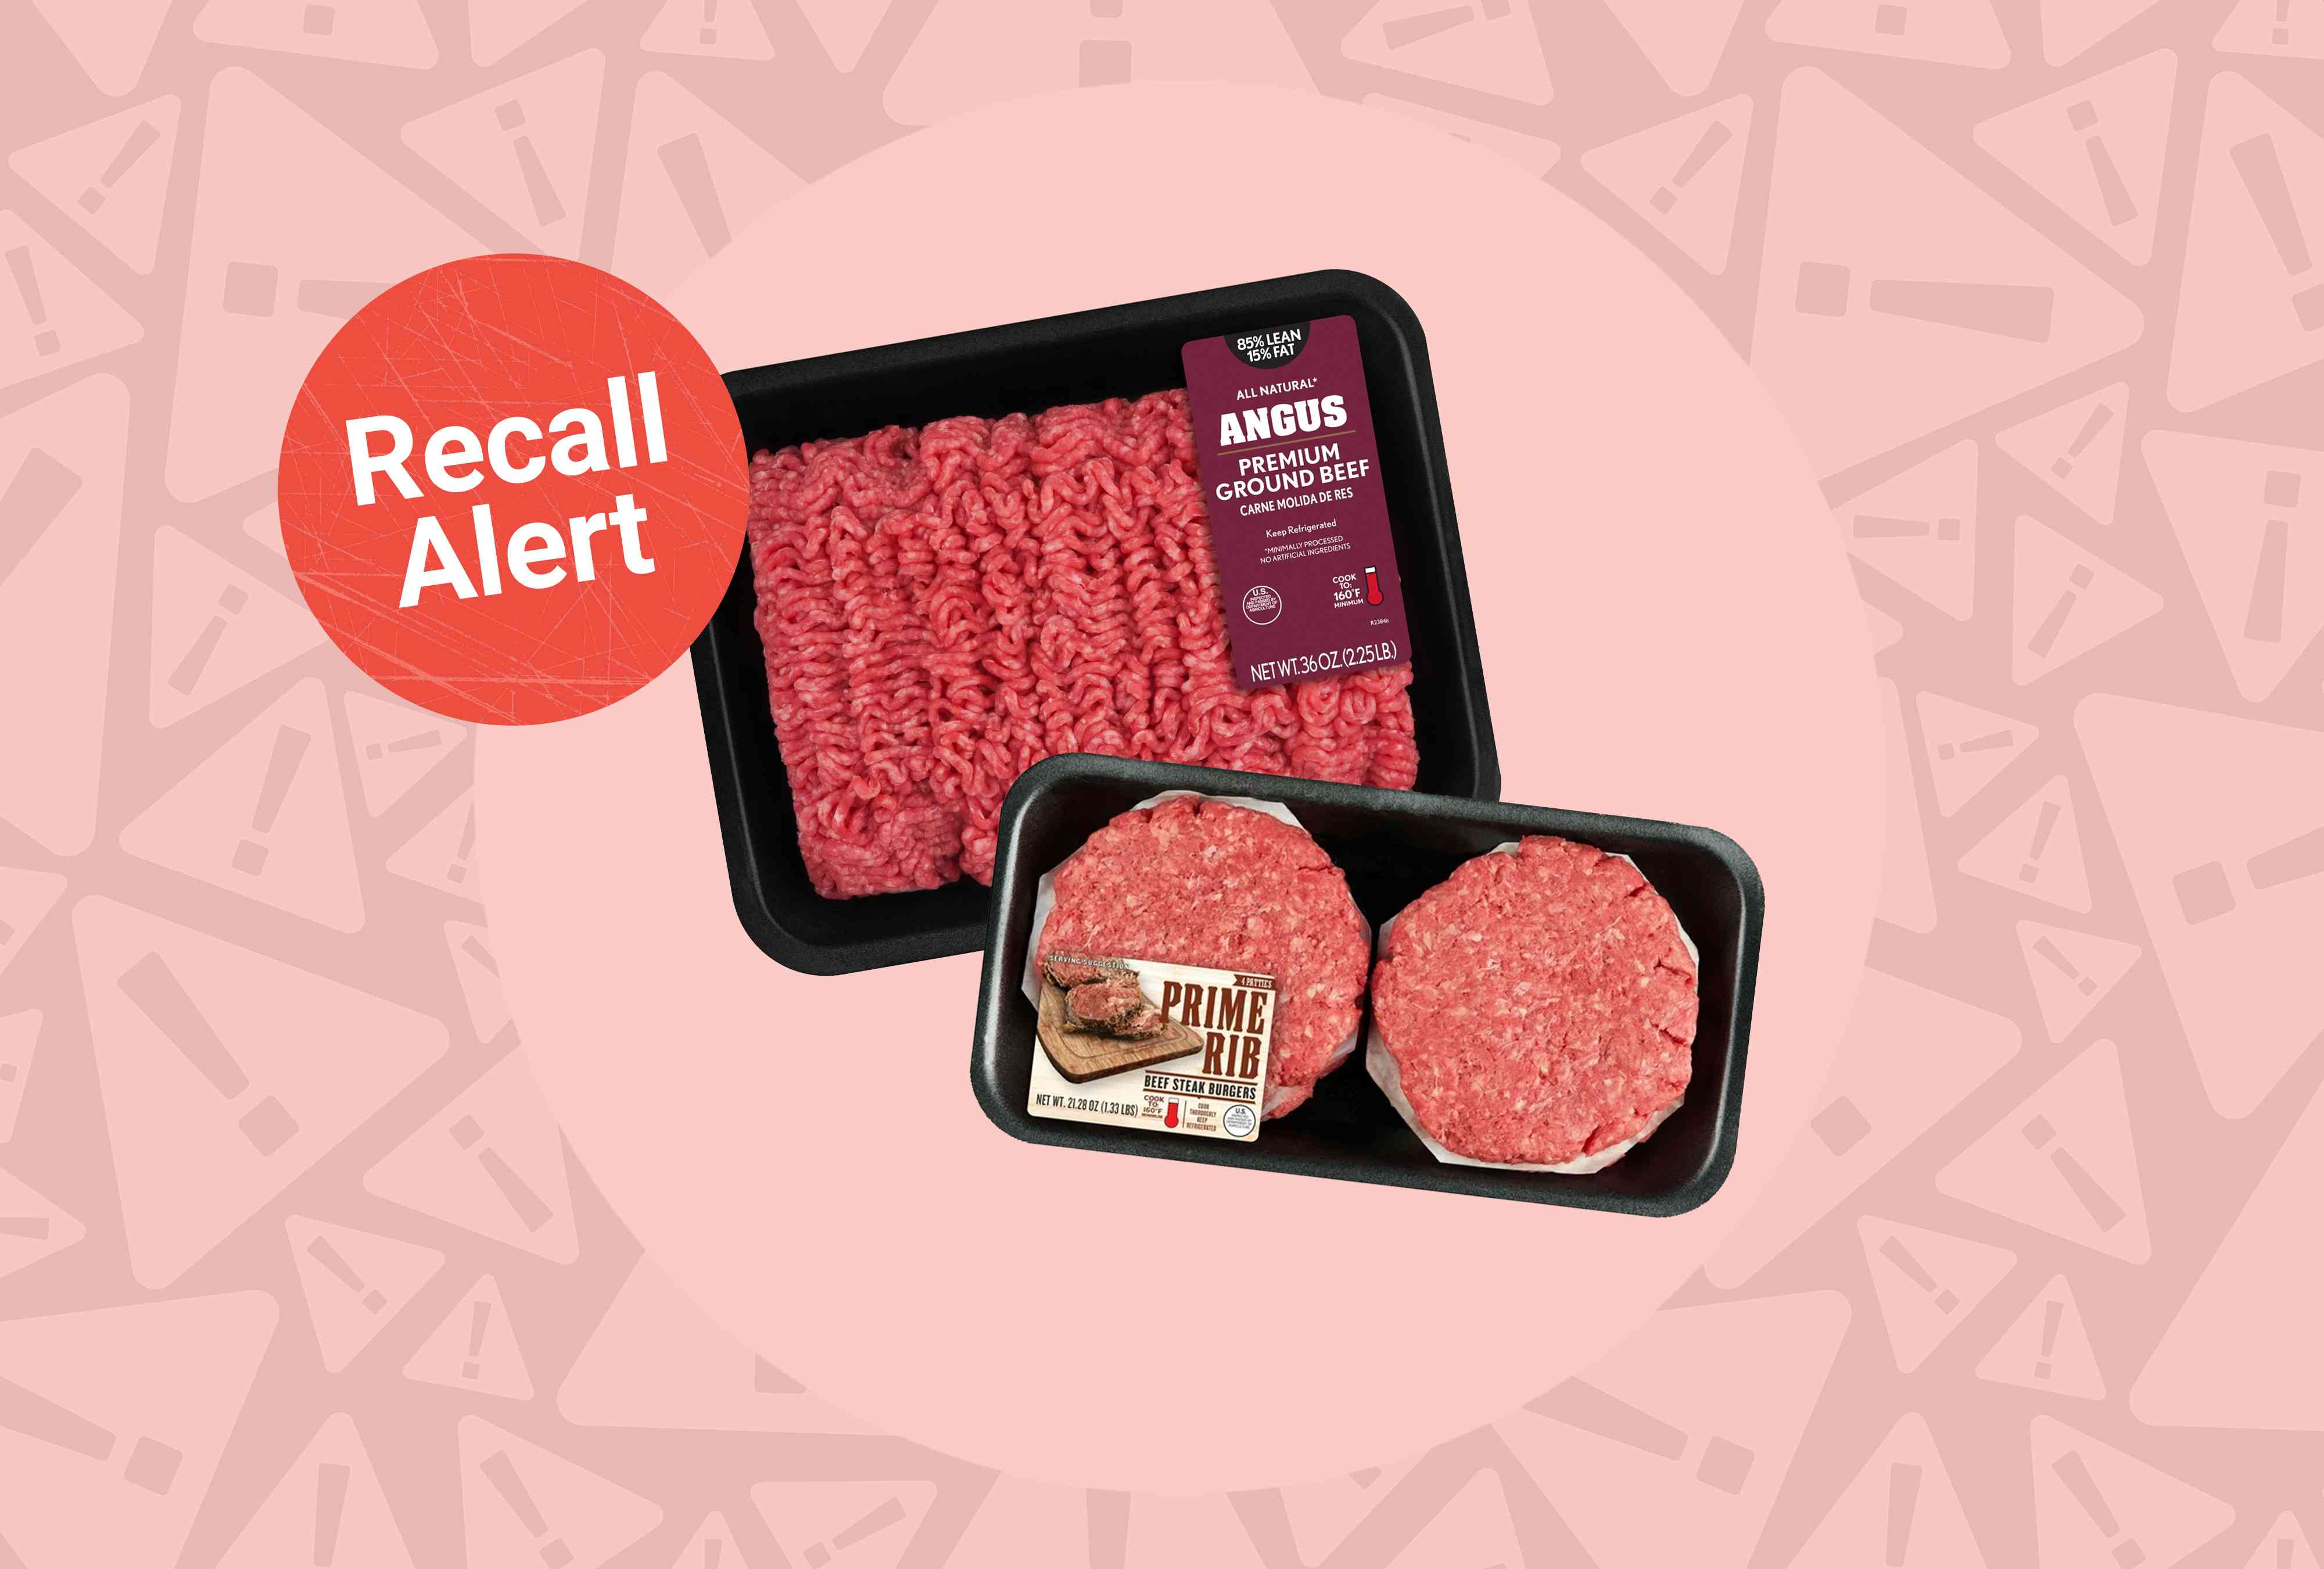 Over 16,000 Pounds of Walmart Ground Beef Recalled Nationwide Due to Possible E. Coli Contamination